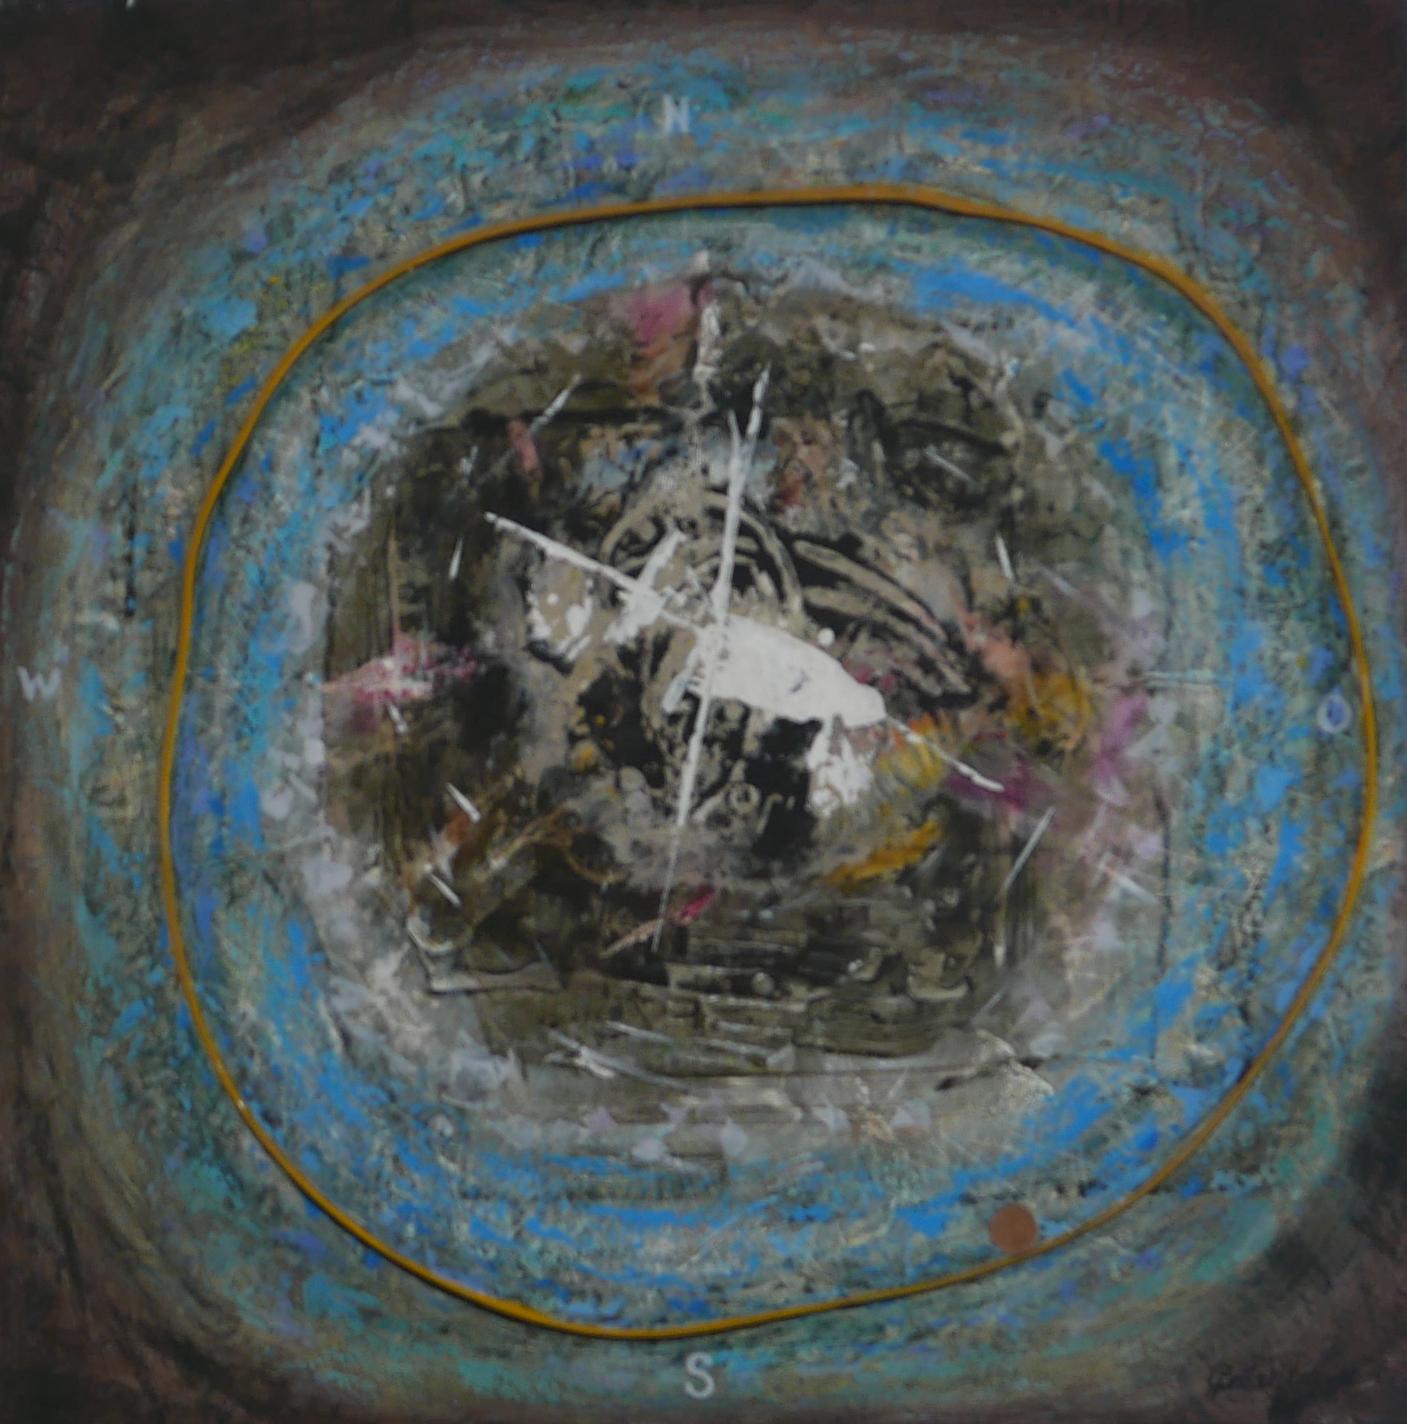 Gogi Gelantia Abstract Painting - Milky Way - painting, found objects, compass, circular, blue, gold, abstract